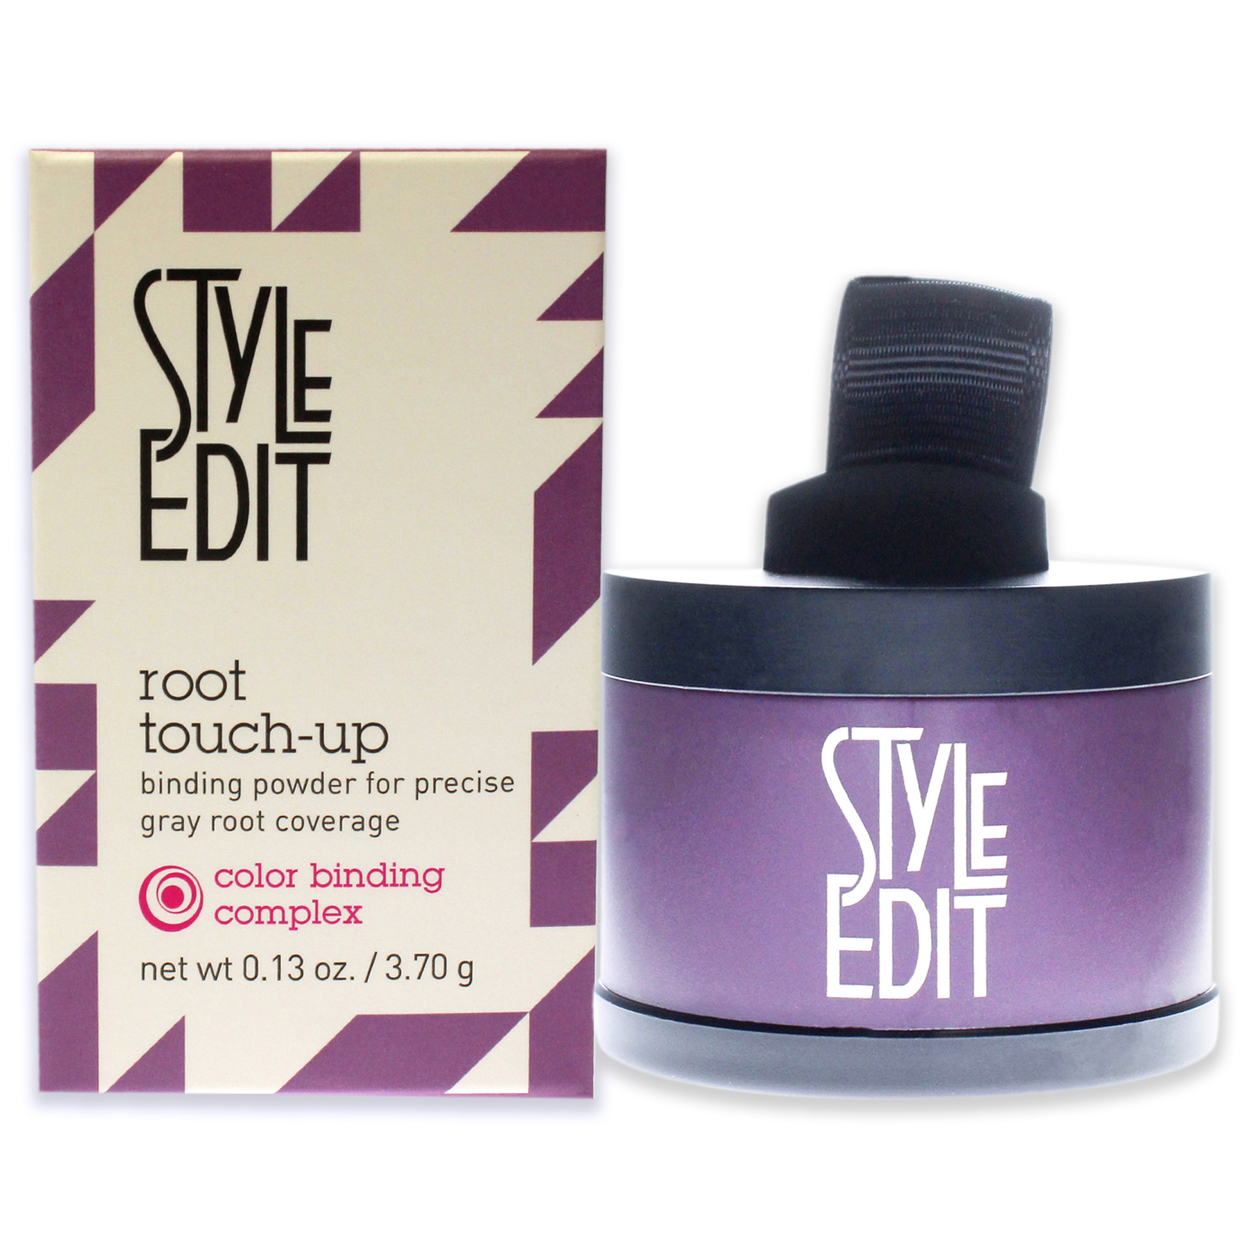 Style Edit Root Touch-Up Powder - Light Brown Hair Color 0.13 Oz